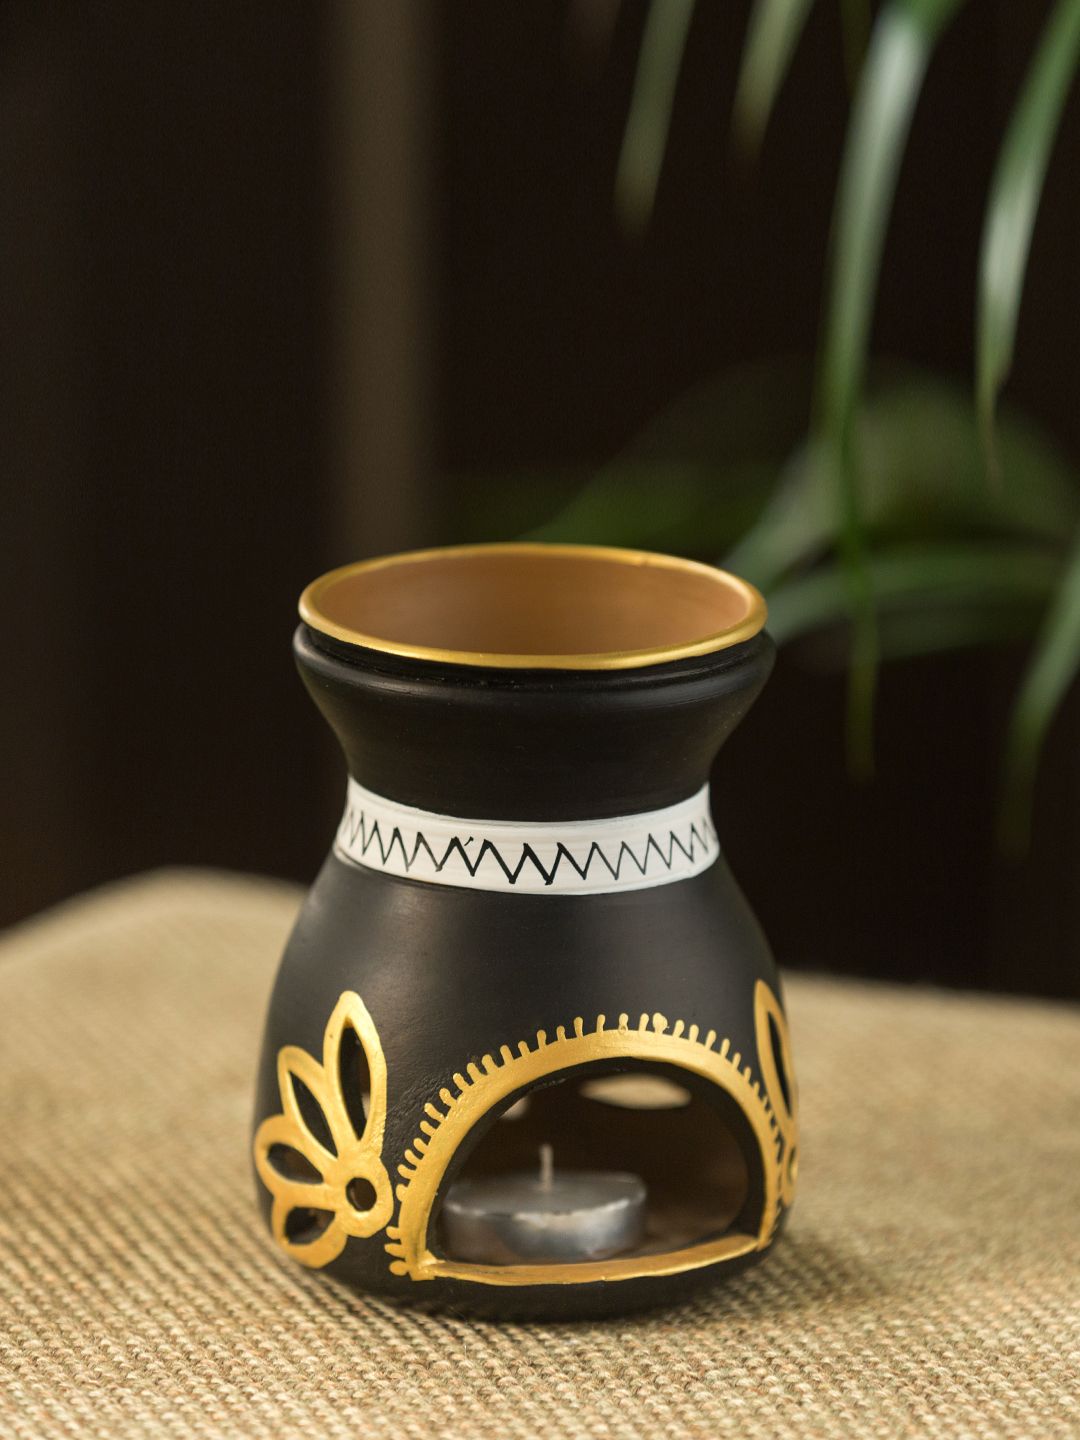 ExclusiveLane Brown & Gold-Toned Madhubani Hand-Painted Terracotta Aroma Diffuser Price in India